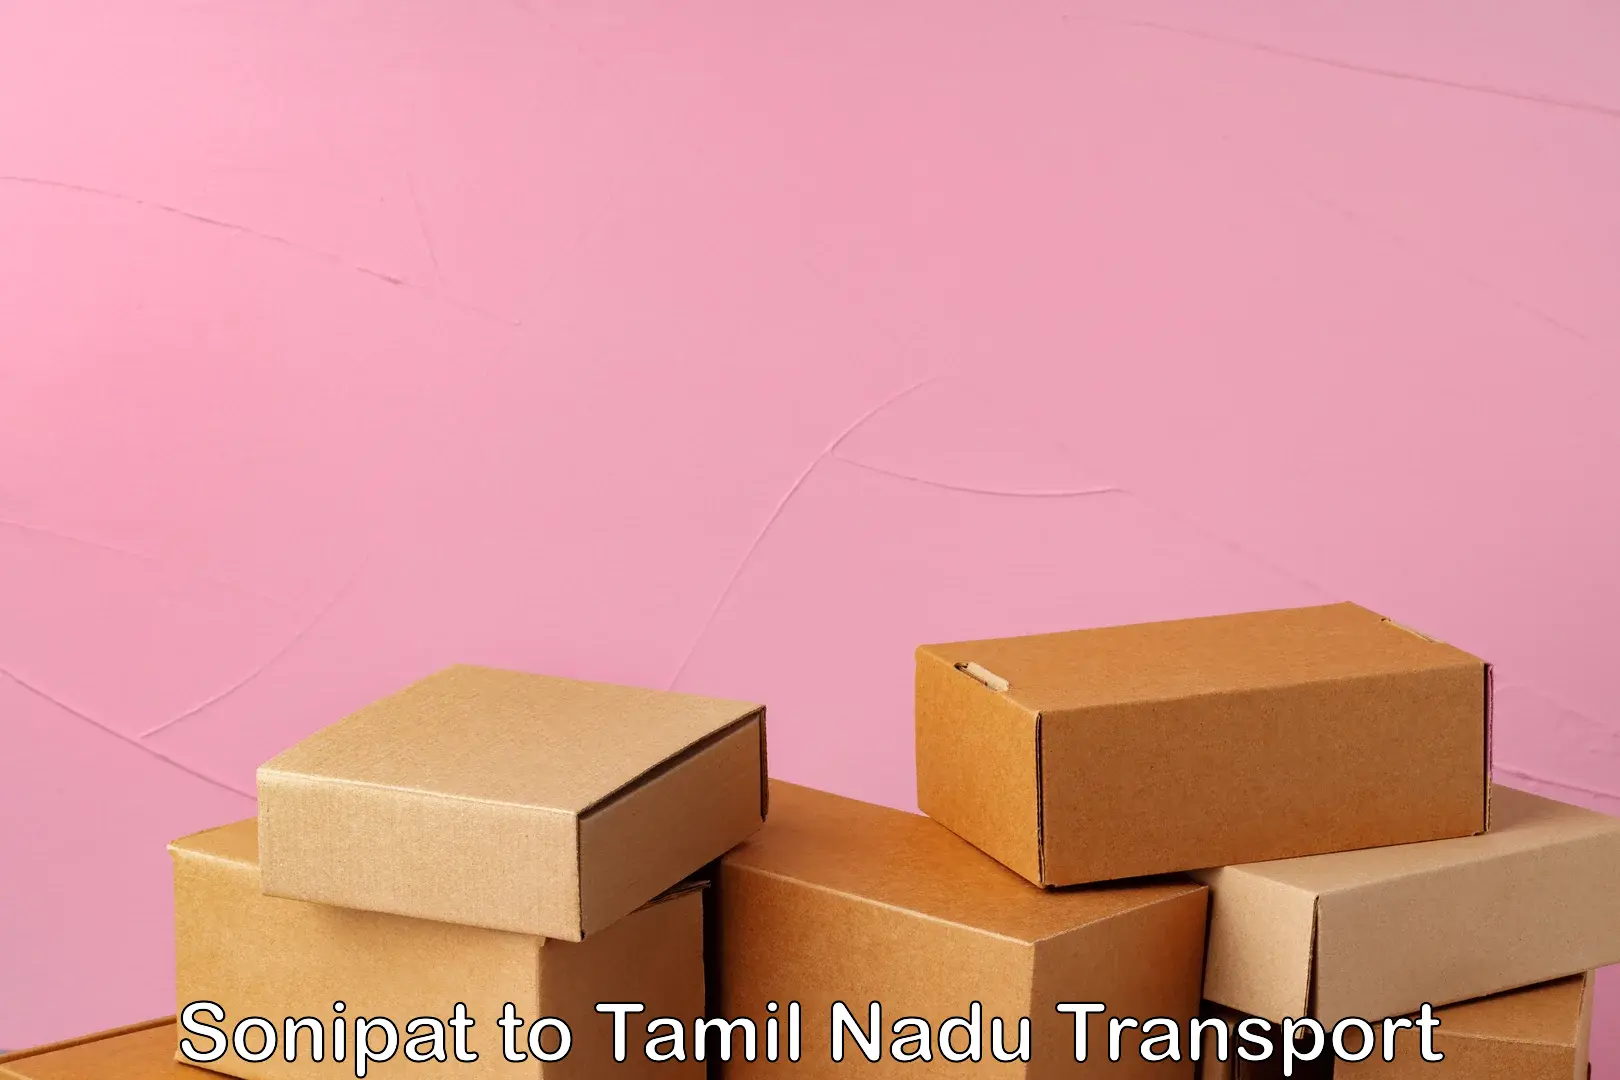 Two wheeler transport services Sonipat to Chennai Port